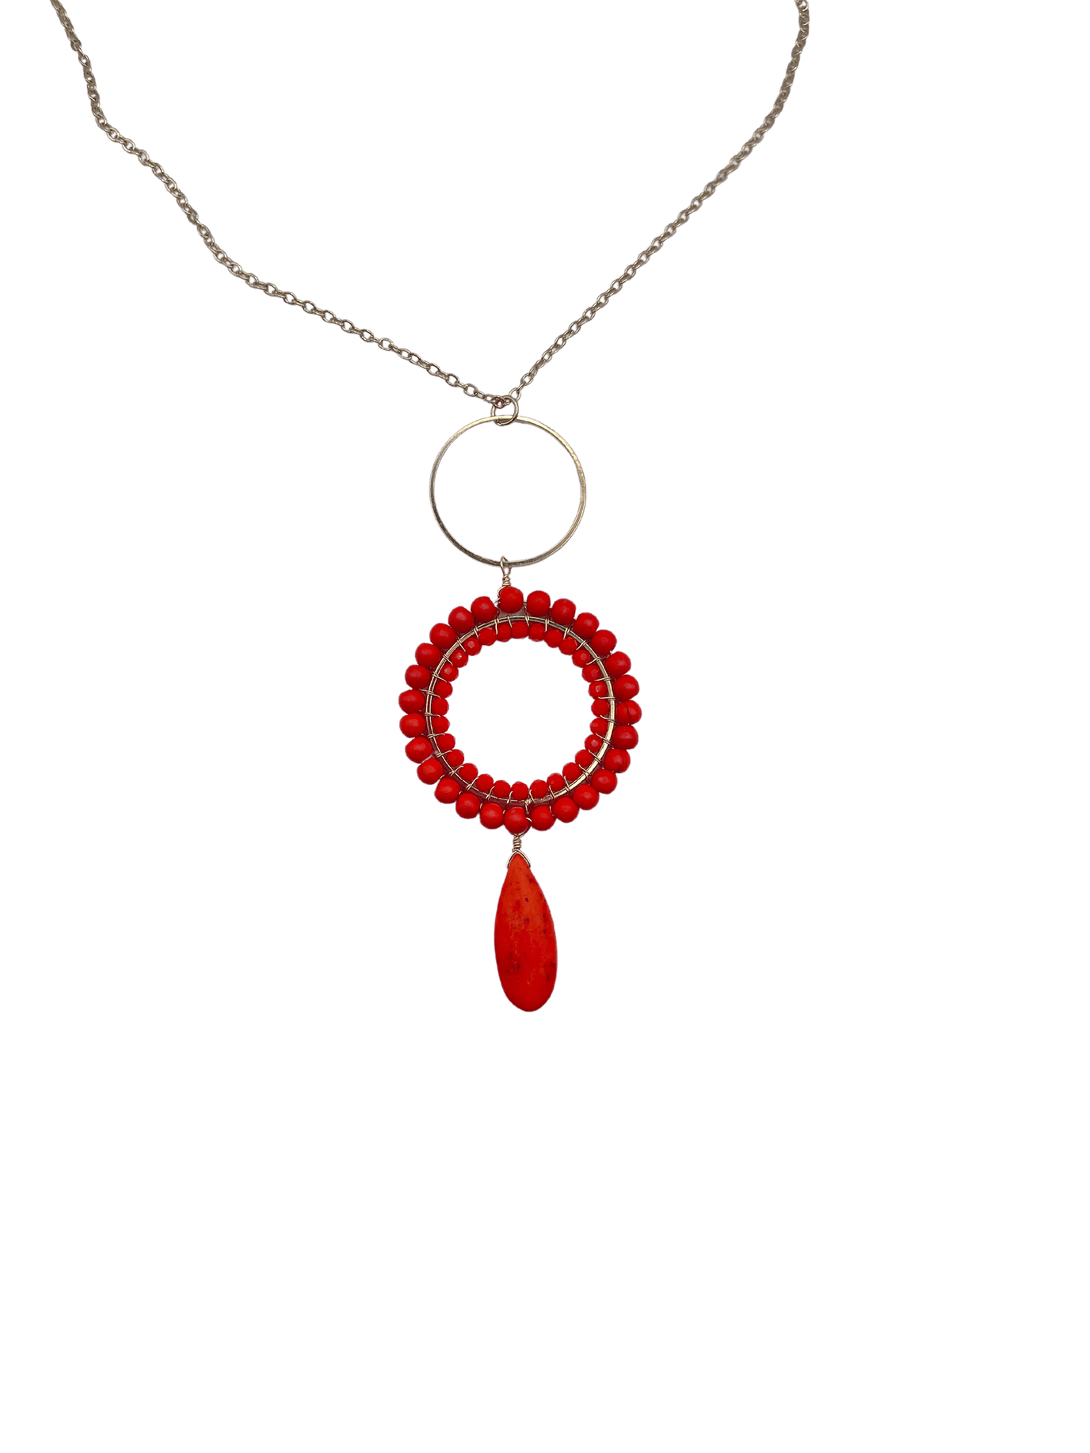 Long Chain Necklace with Orange Beaded Circle and Pendant